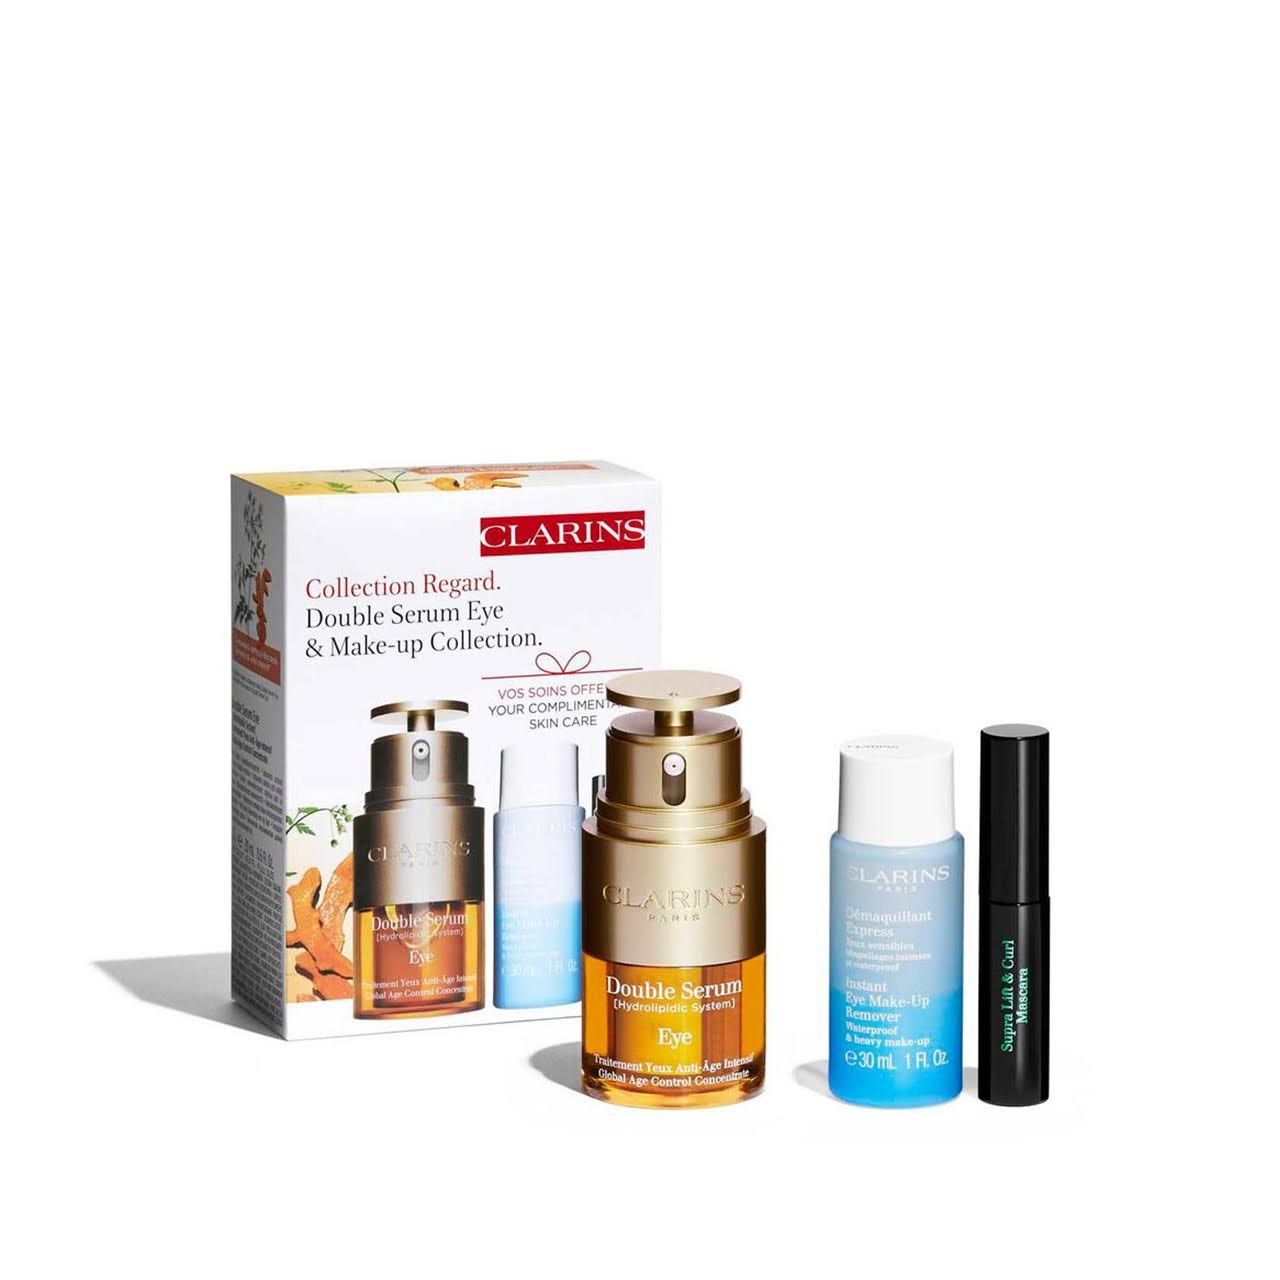 Clarins Double Serum Eye & Make-up Collection Kit